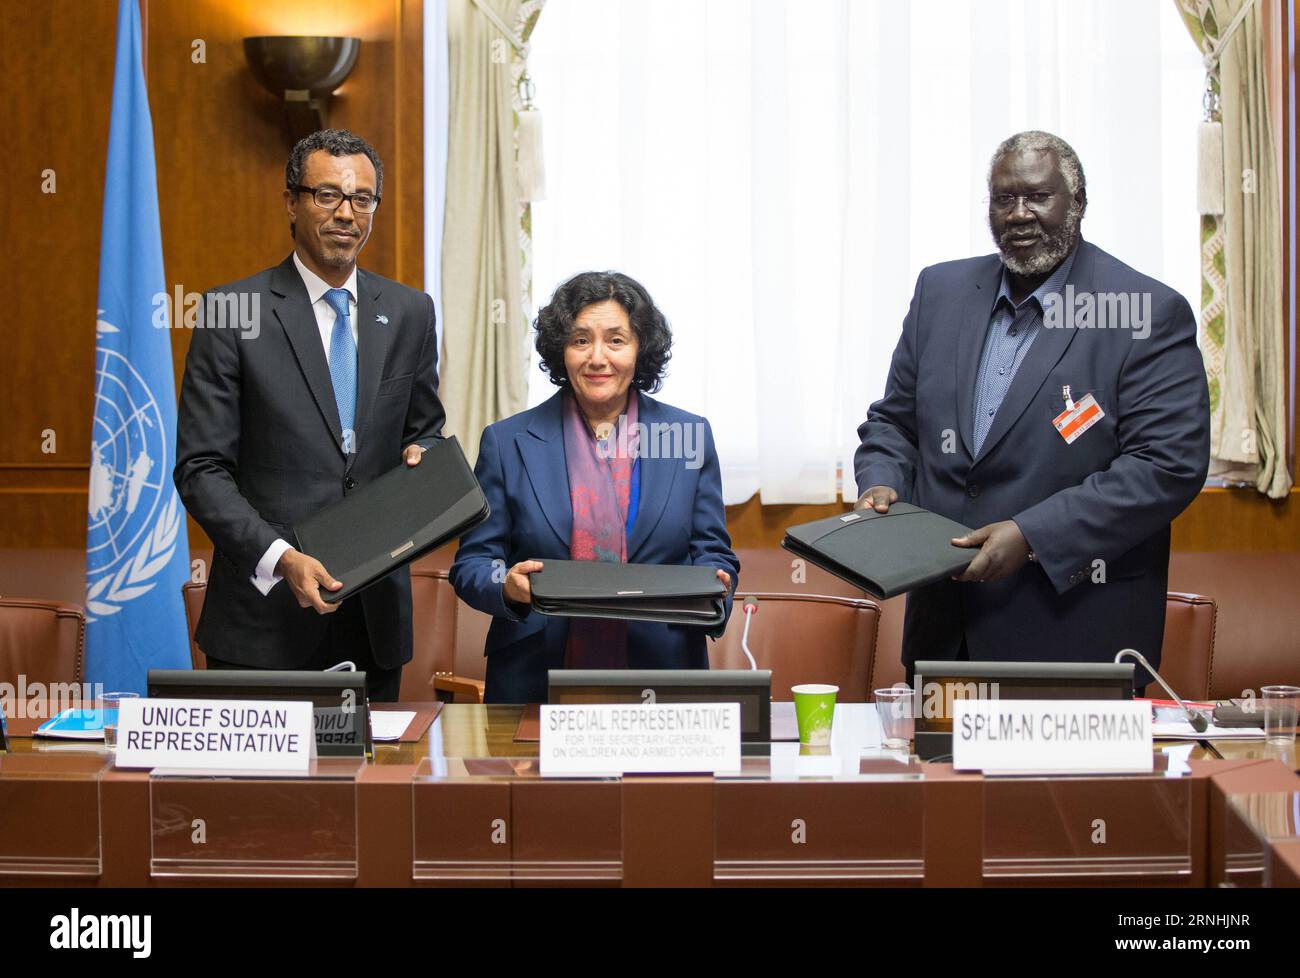 Bilder des Tages (161123) -- GENEVA, Nov. 23, 2016 -- Malik Agar (R), chairman of the rebel Sudan People s Liberation Movement (SPLM)/northern sector, the Special Representative of the UN Secretary-General (SRSG) for Children and Armed Conflict Leila Zerrougui (C) and UNICEF Sudan Representative Abdullah A. Fadil pose for a photograph at a signing ceremony of an Action Plan to end and prevent the recruitment and use of children in conflict in Geneva, Switzerland, Nov. 23, 2016. ) SWITZERLAND-GENEVA-UN-SUDAN-SPLM/NORTHERN SECTOR-CHILDREN-CONFLICT-ACTION PLAN XuxJinquan PUBLICATIONxNOTxINxCHN Stock Photo